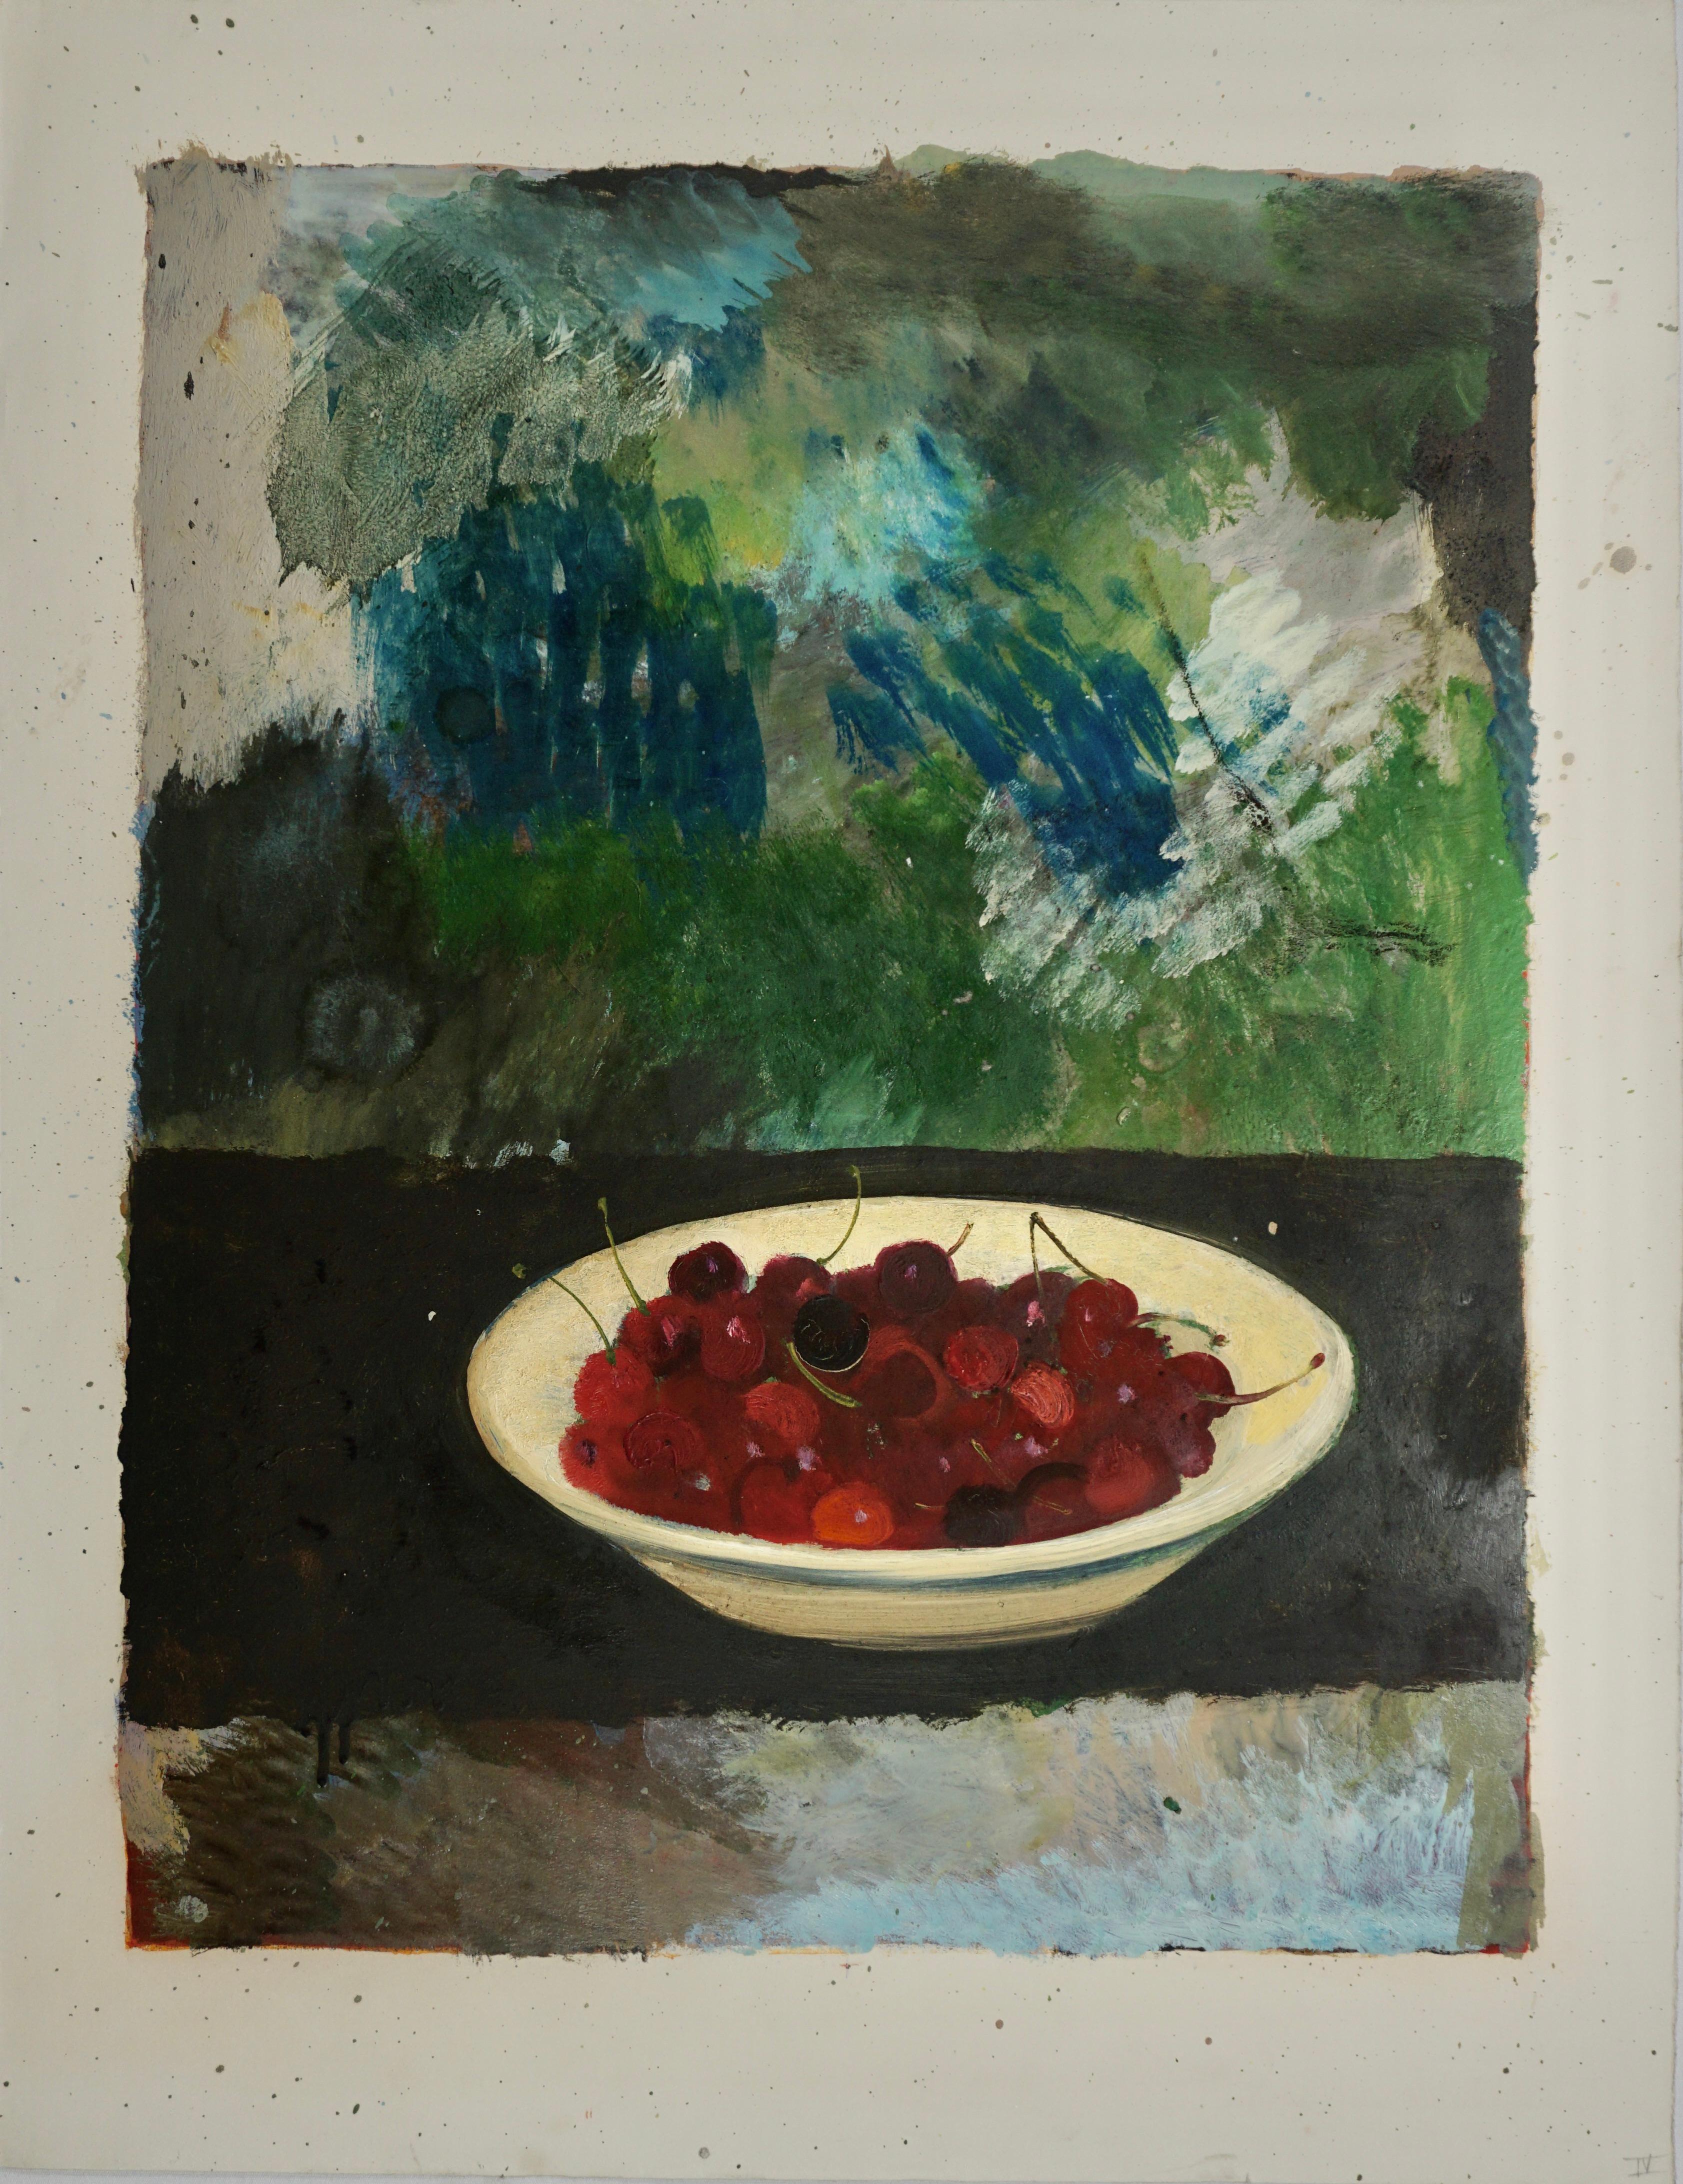 Untitled Still Life: Bowl Of Cherries On A Table - Contemporary Painting by René Genis